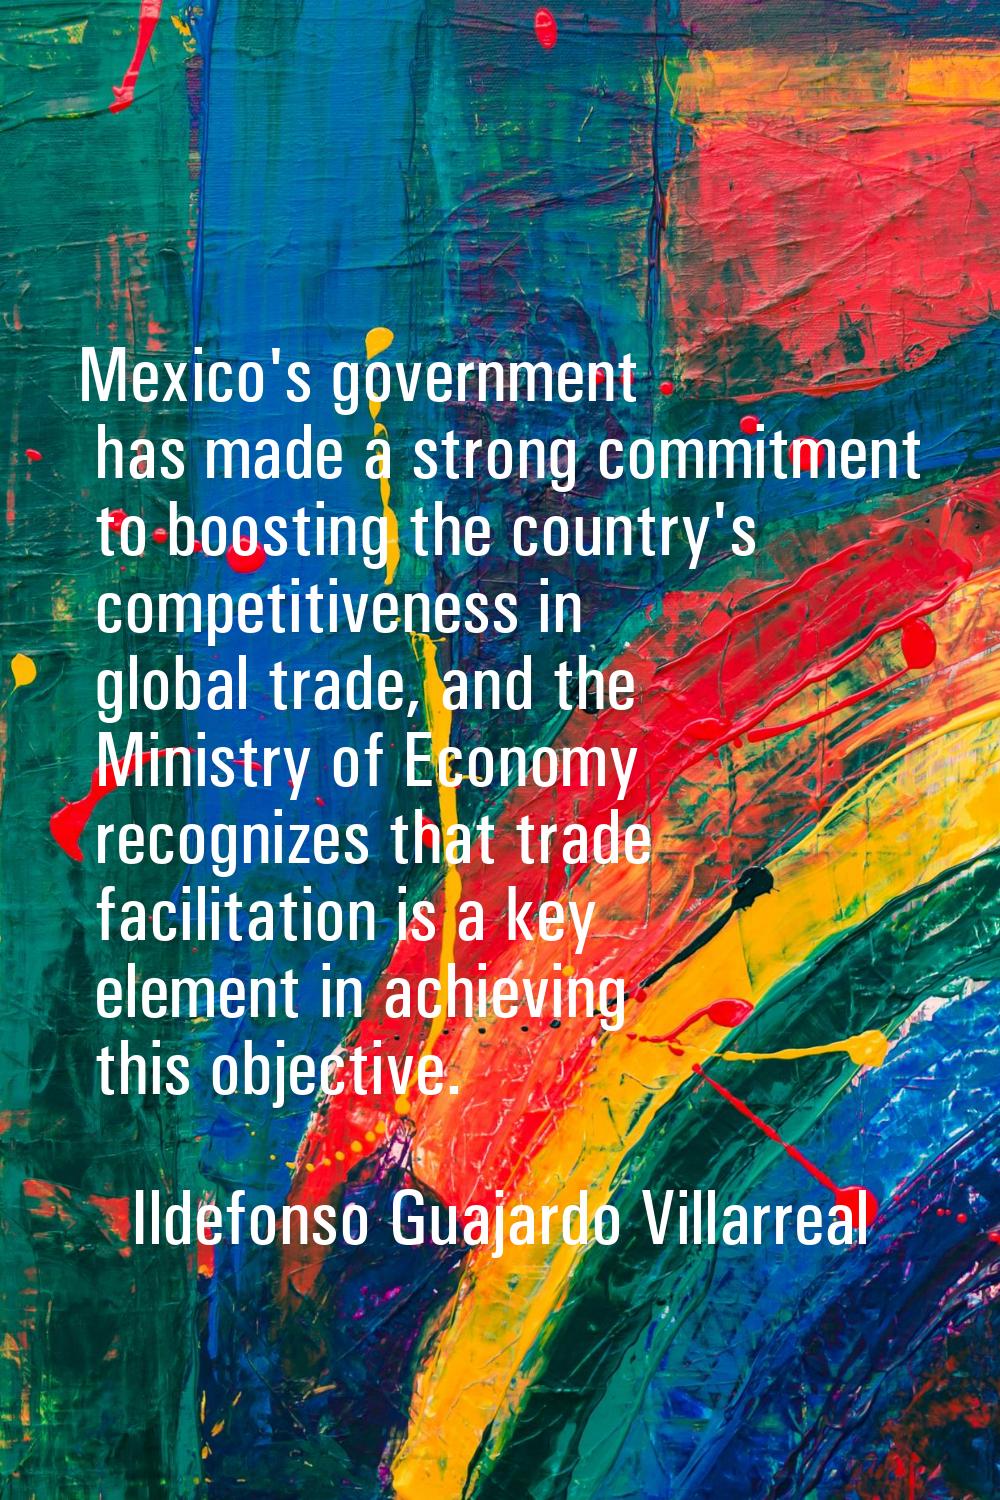 Mexico's government has made a strong commitment to boosting the country's competitiveness in globa